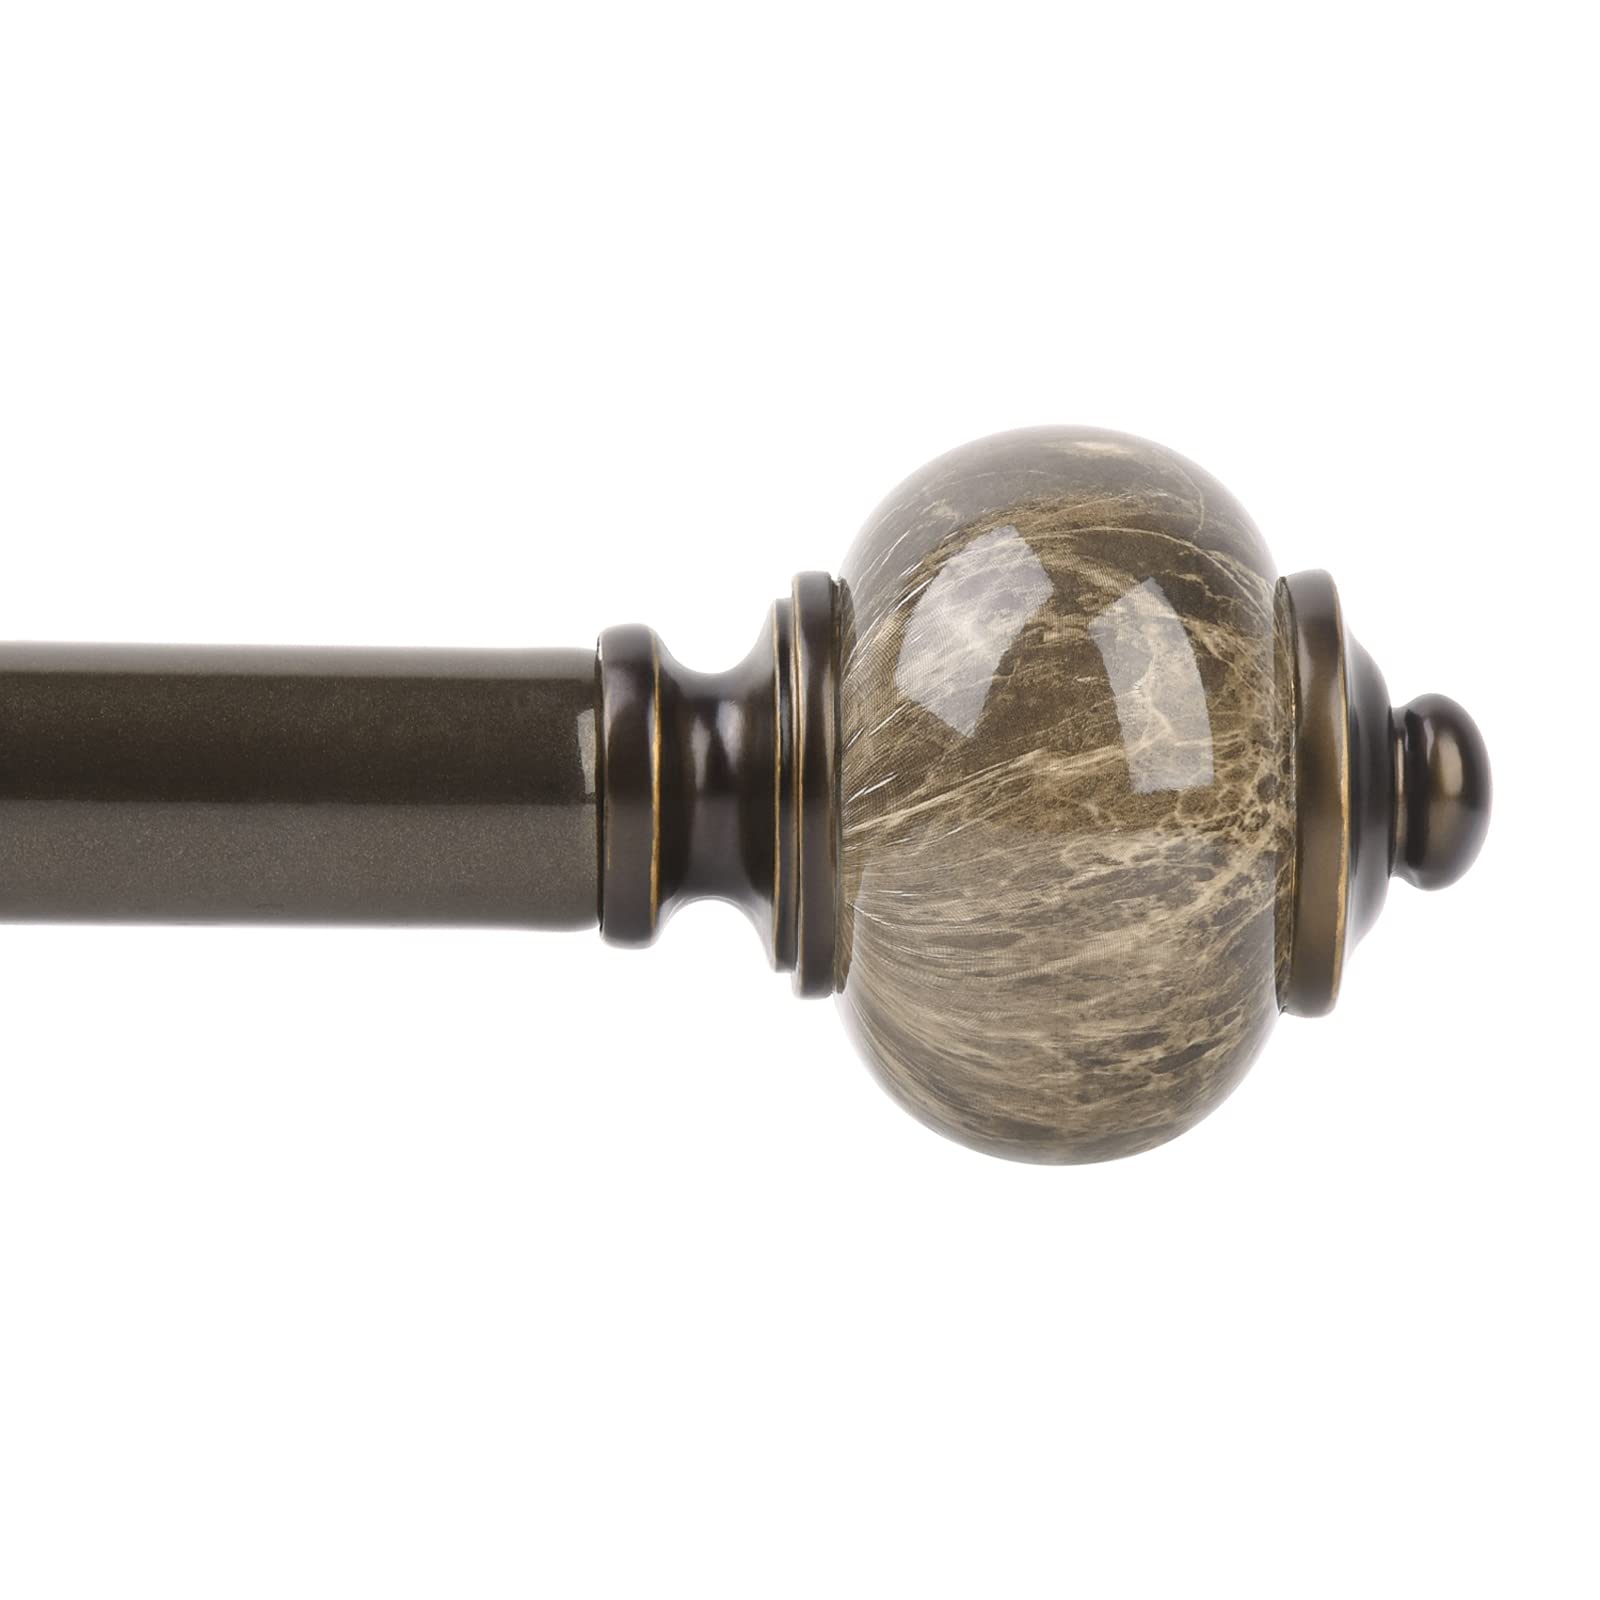 KAMANINA 1 Inch Curtain Rod Single Drapery Rod 36 to 72 Inches (3-6 Feet), Bronze Curtain Rods for Windows, Marbled Finials